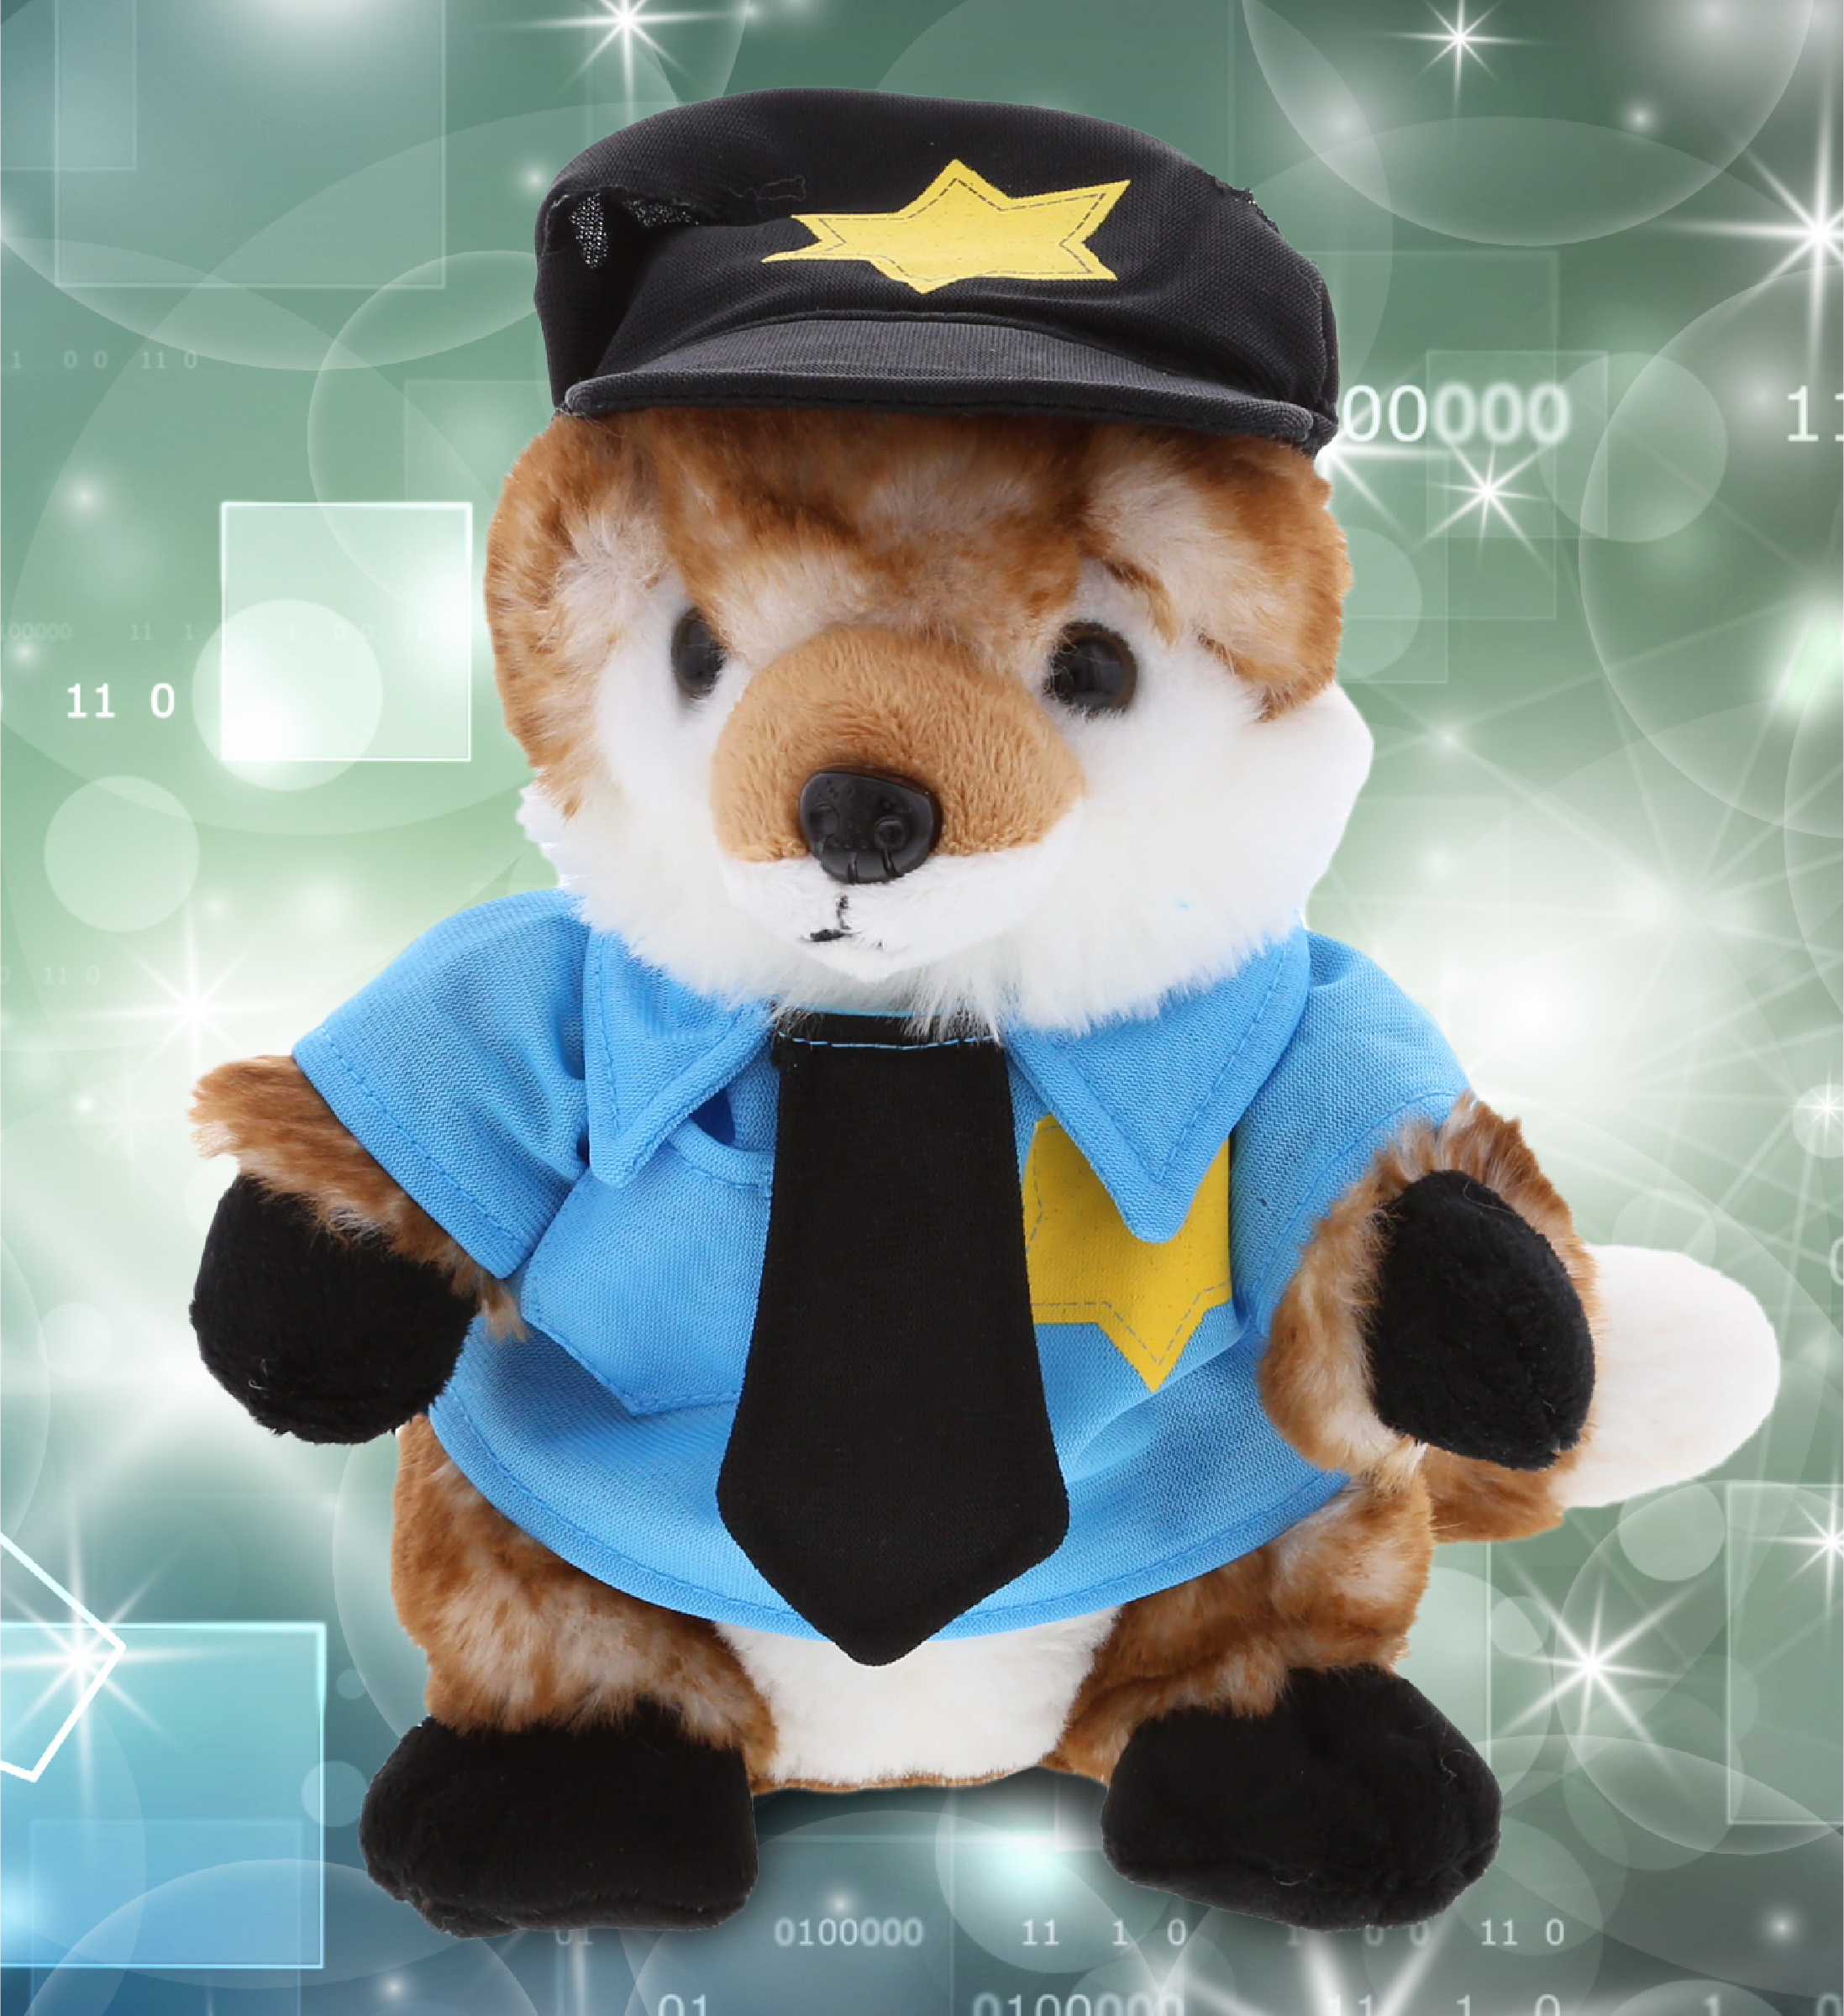 Dollibu Big Eye Sea Turtle Police Officer Plush Toy - Soft Sea Turtle Cop Stuffed Animal Dress Up with Cute Cop Uniform & Cap Outfit - 6 inch Inches